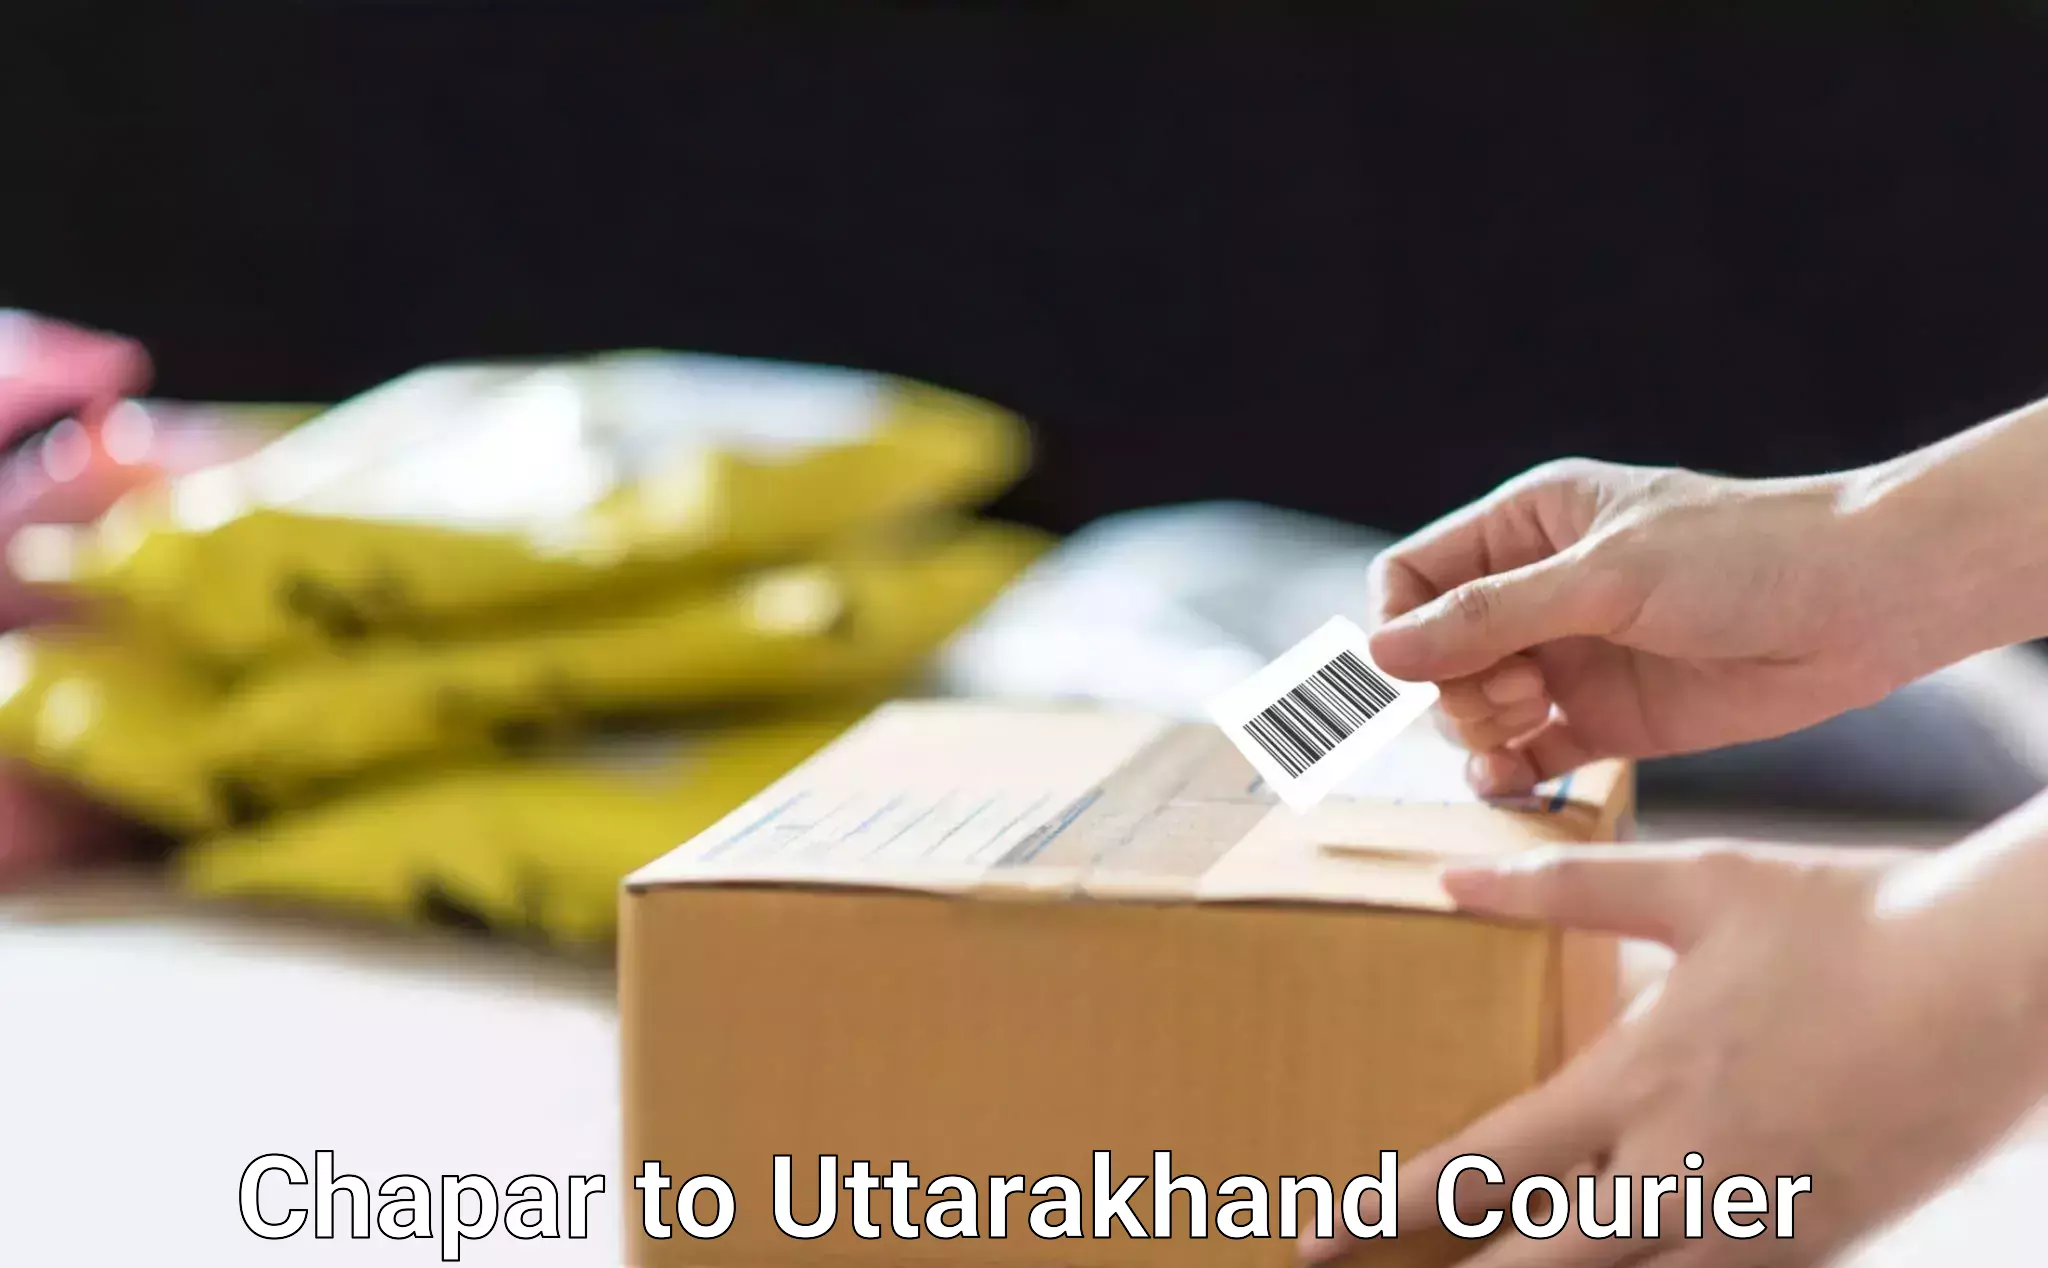 Express delivery capabilities Chapar to Uttarakhand